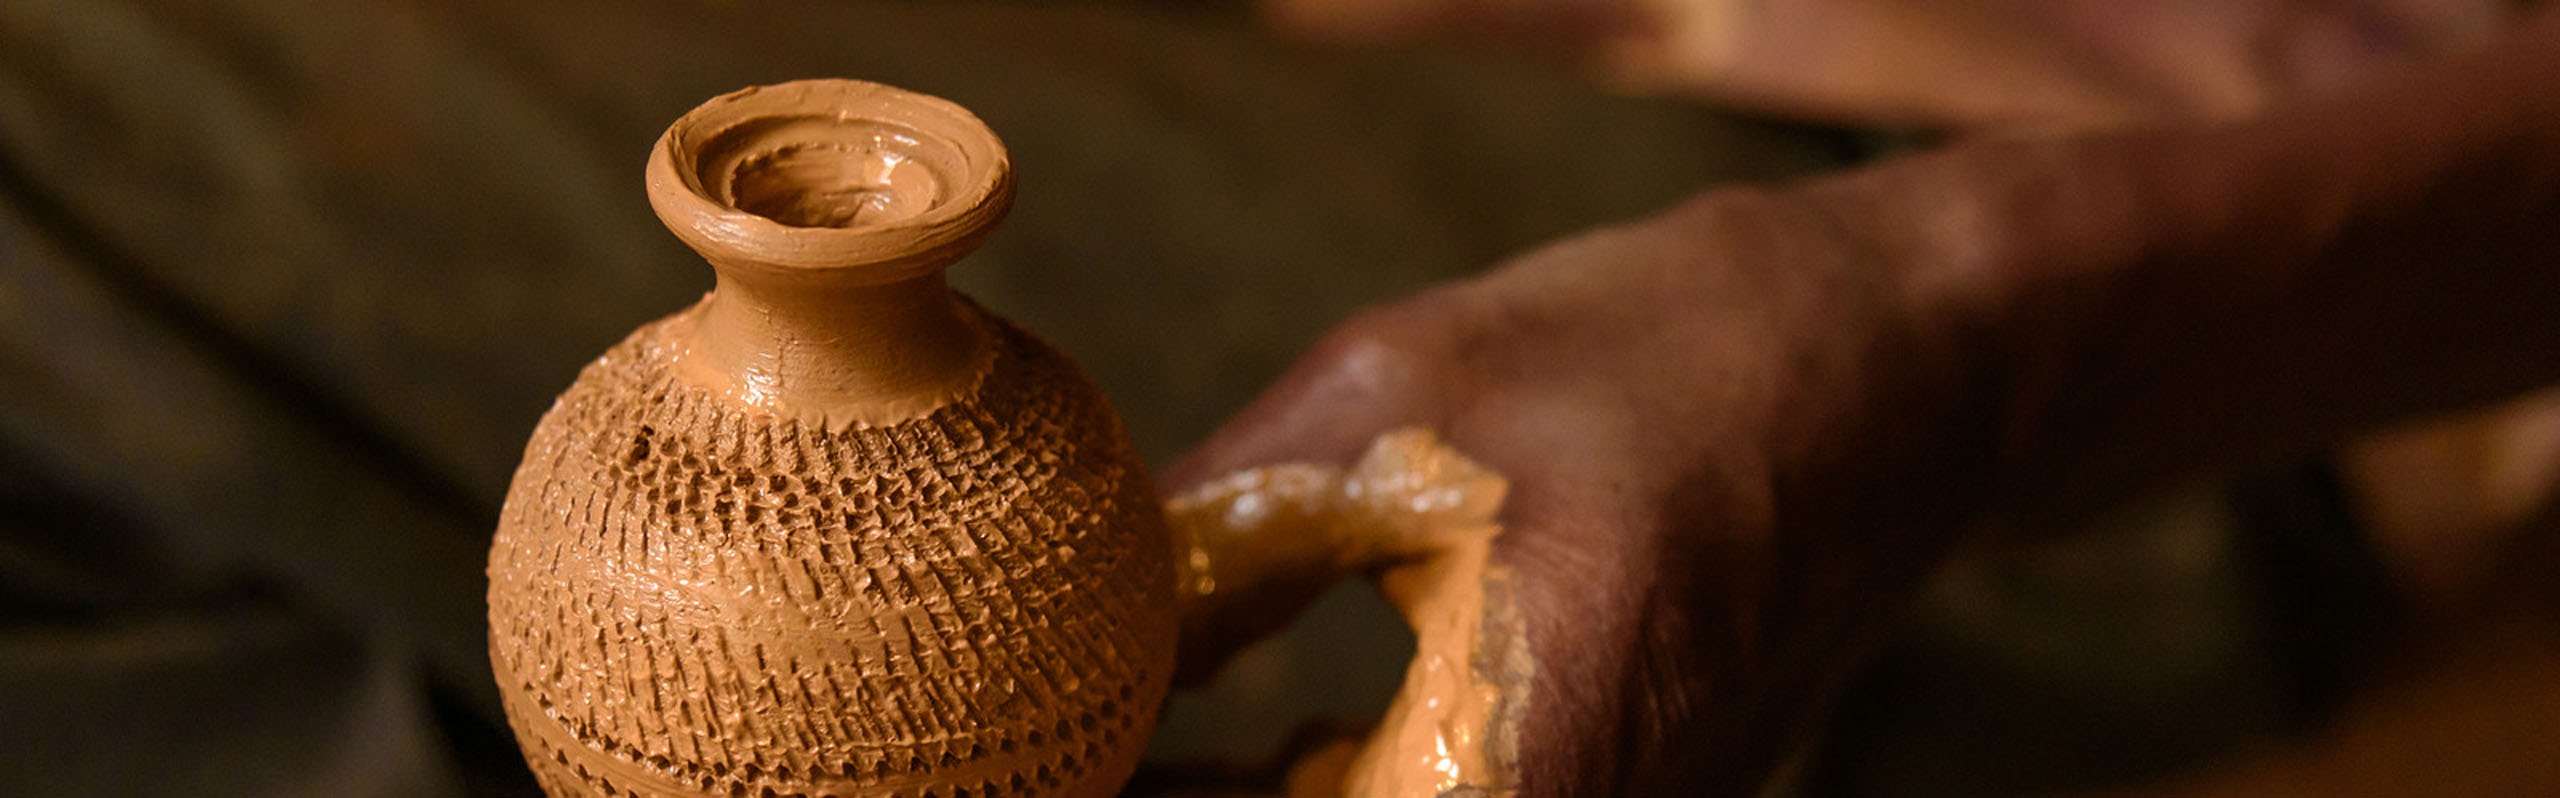 Indian Arts and Handicrafts - Best 6 Kinds of Souvenirs to Buy in India 